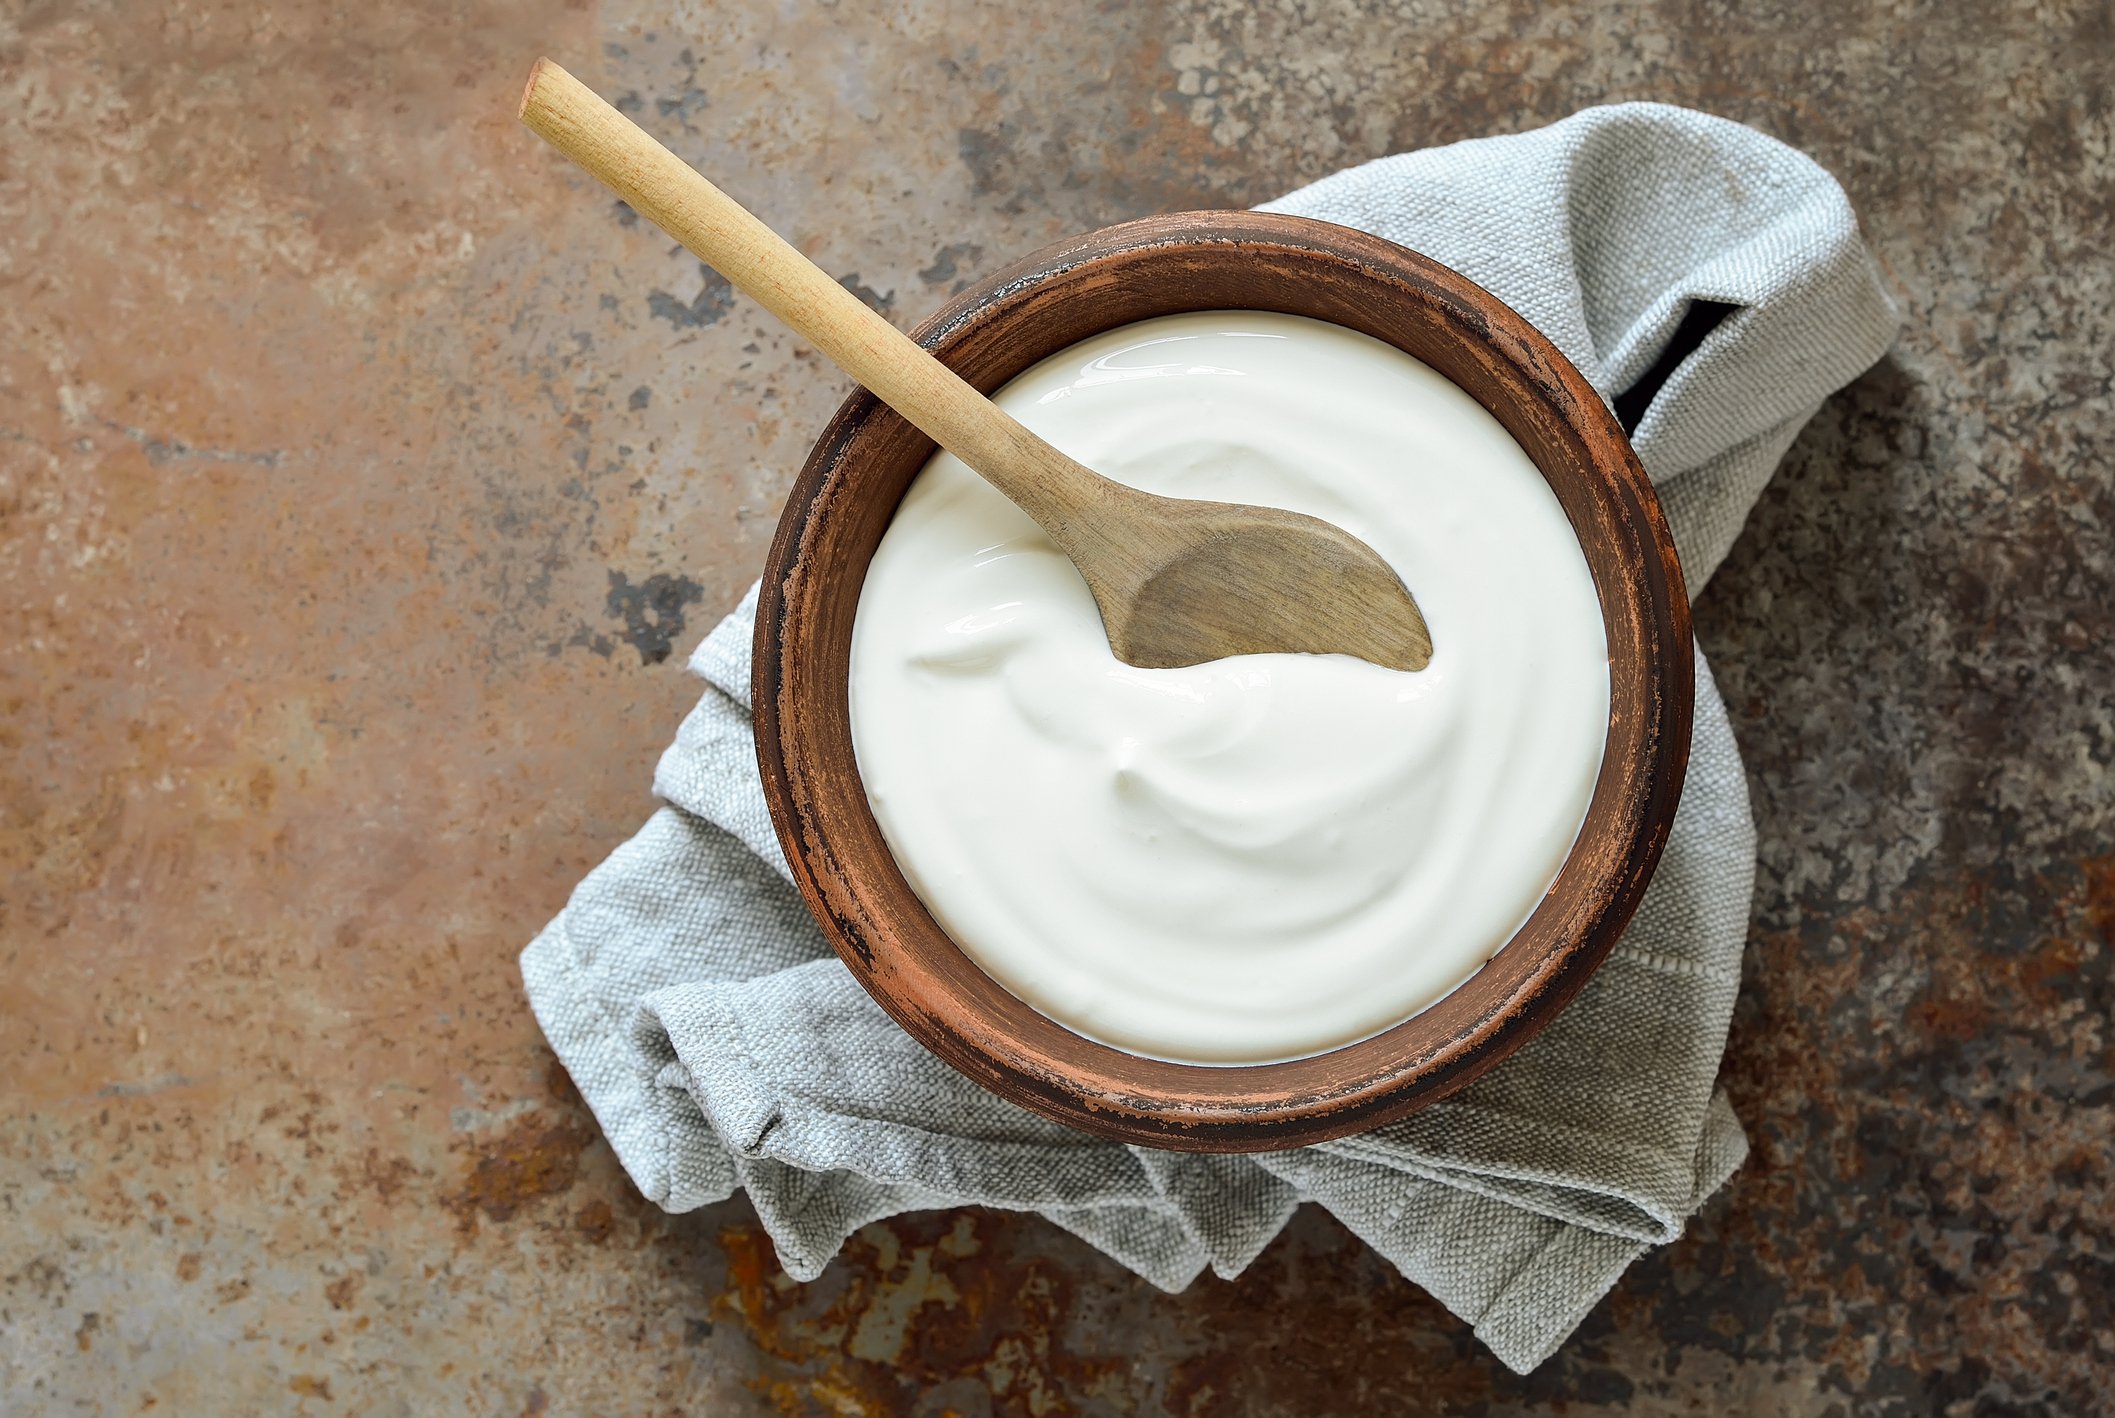 Homemade yogurt is an excellent source of calcium as well as gut-friendly probiotics. (iStock Photo)